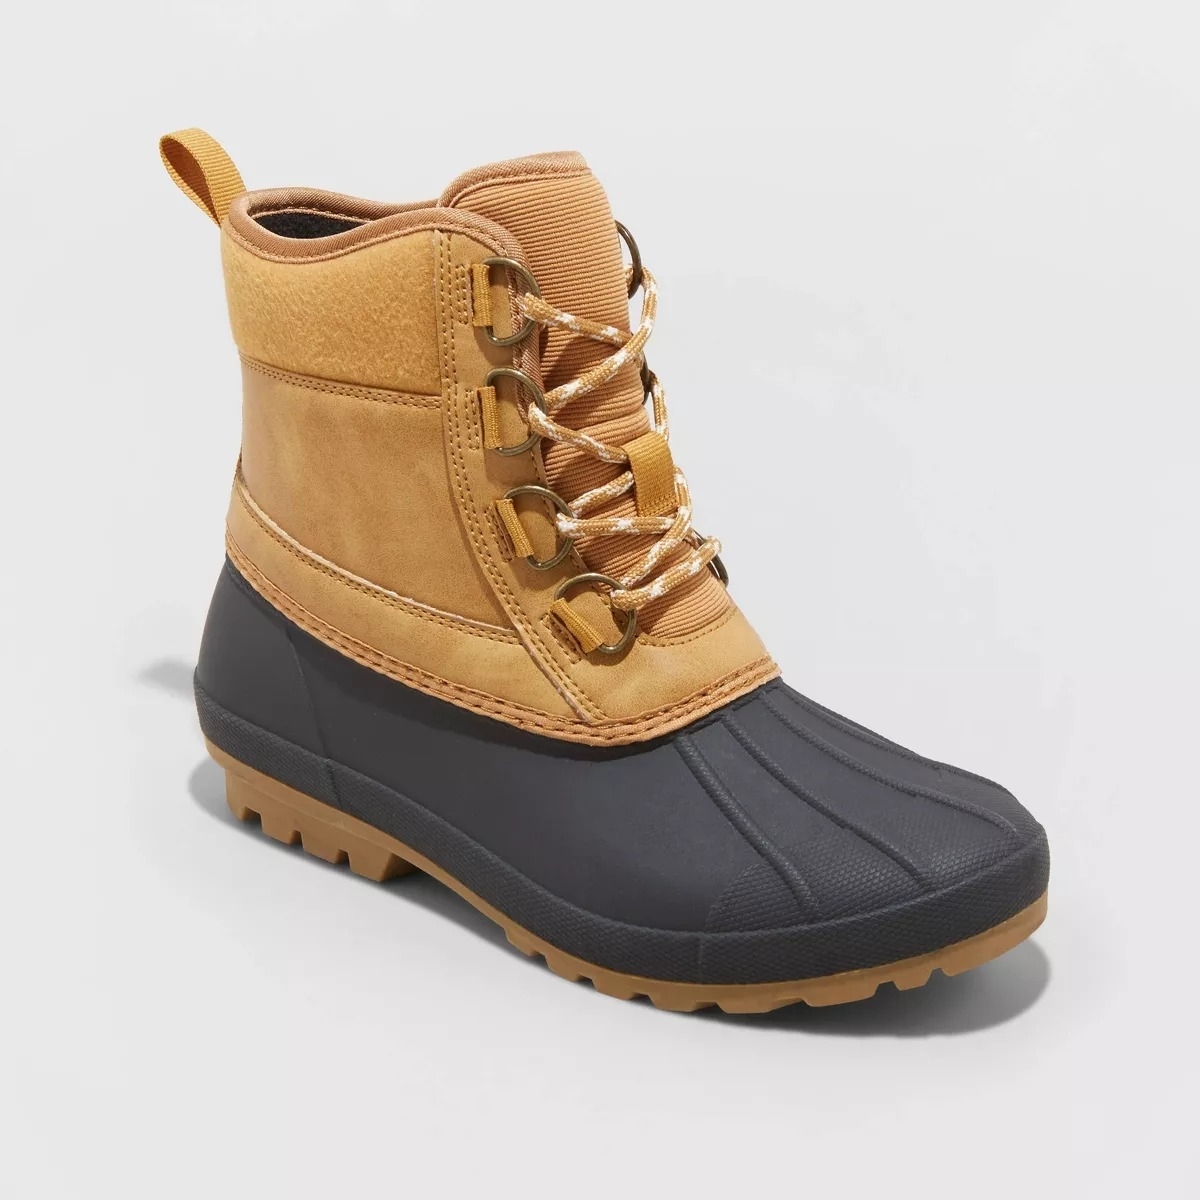 tan and black waterproof duck boots